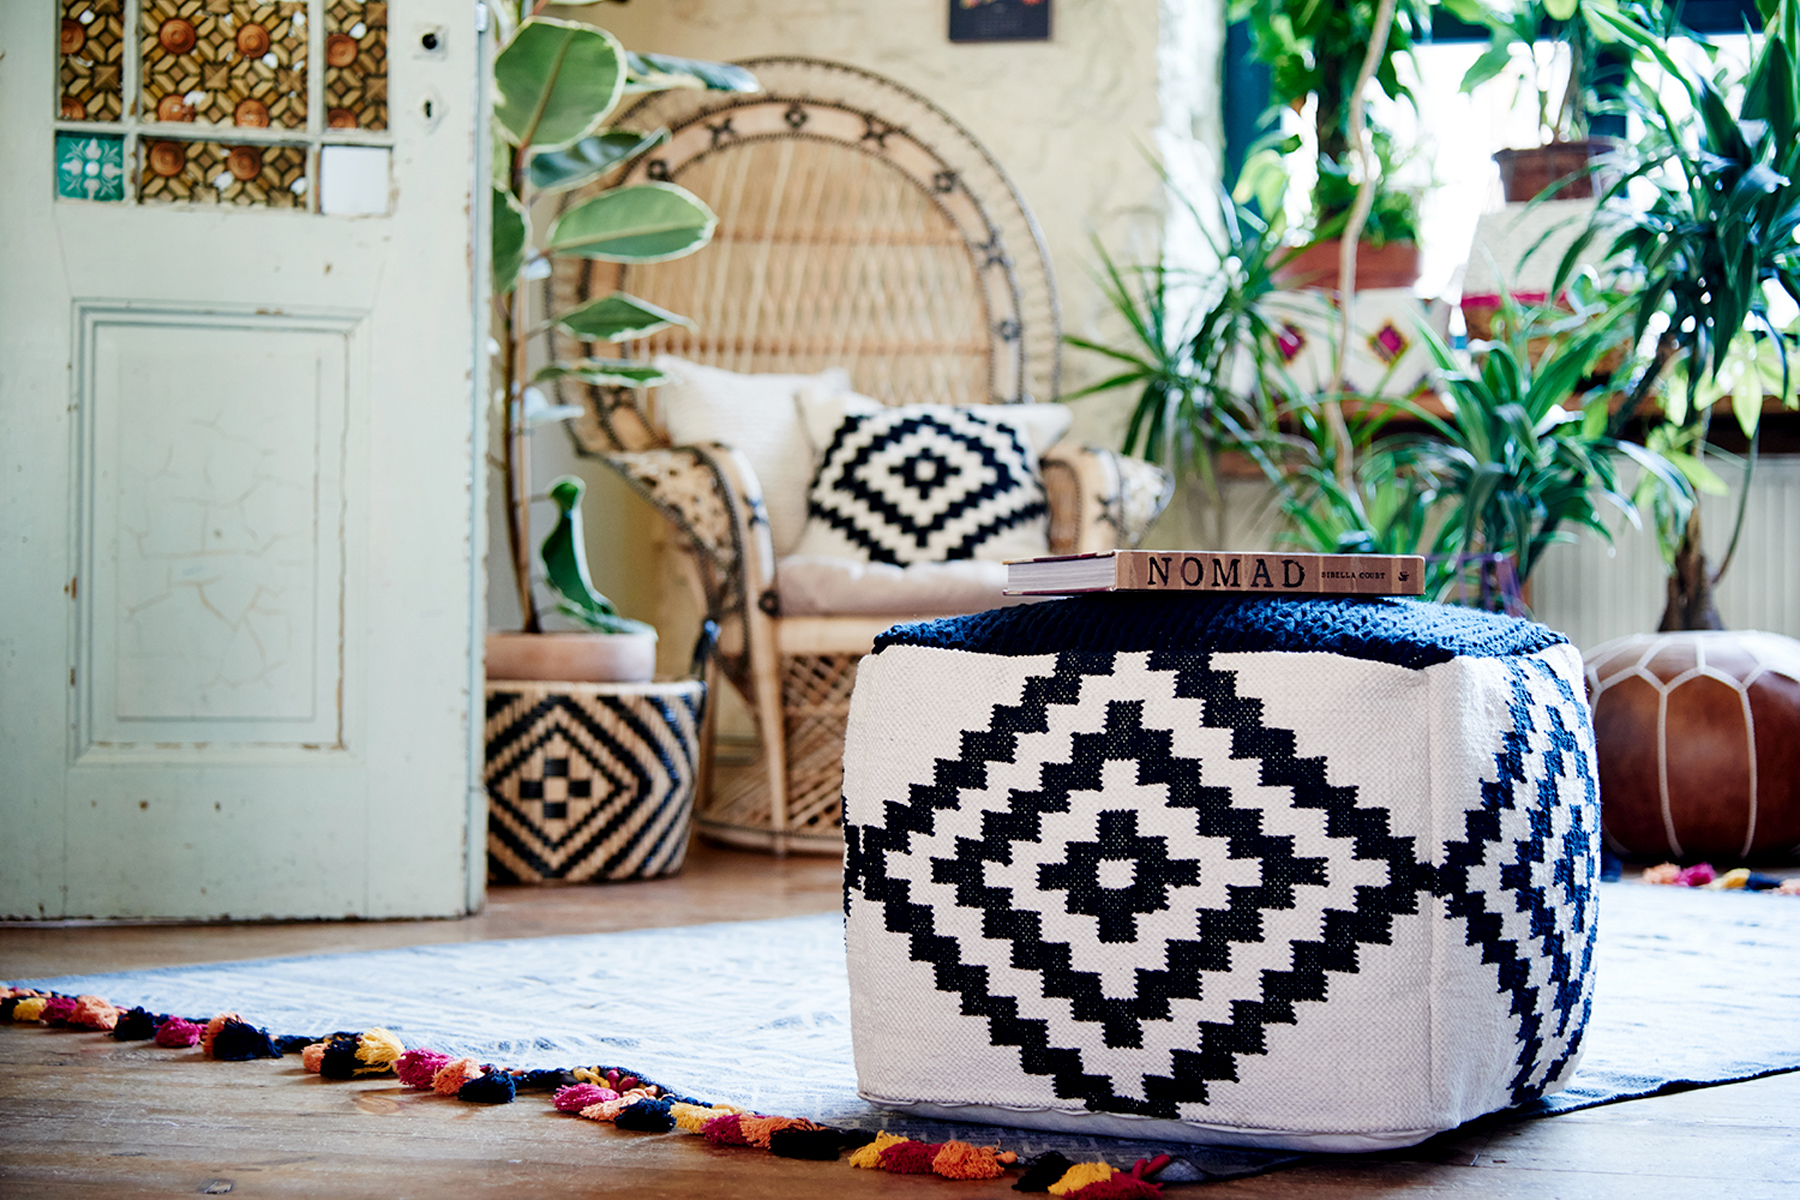 eva padberg home24 c'est nous interior blog styling home&living marrakesh cozy cocooning bold colours life lifestyle lifestyleblog interior blog model beauty summer mood moodboard leather accessories pouf knit pattern cats & dogs blog ricarda schernus 4